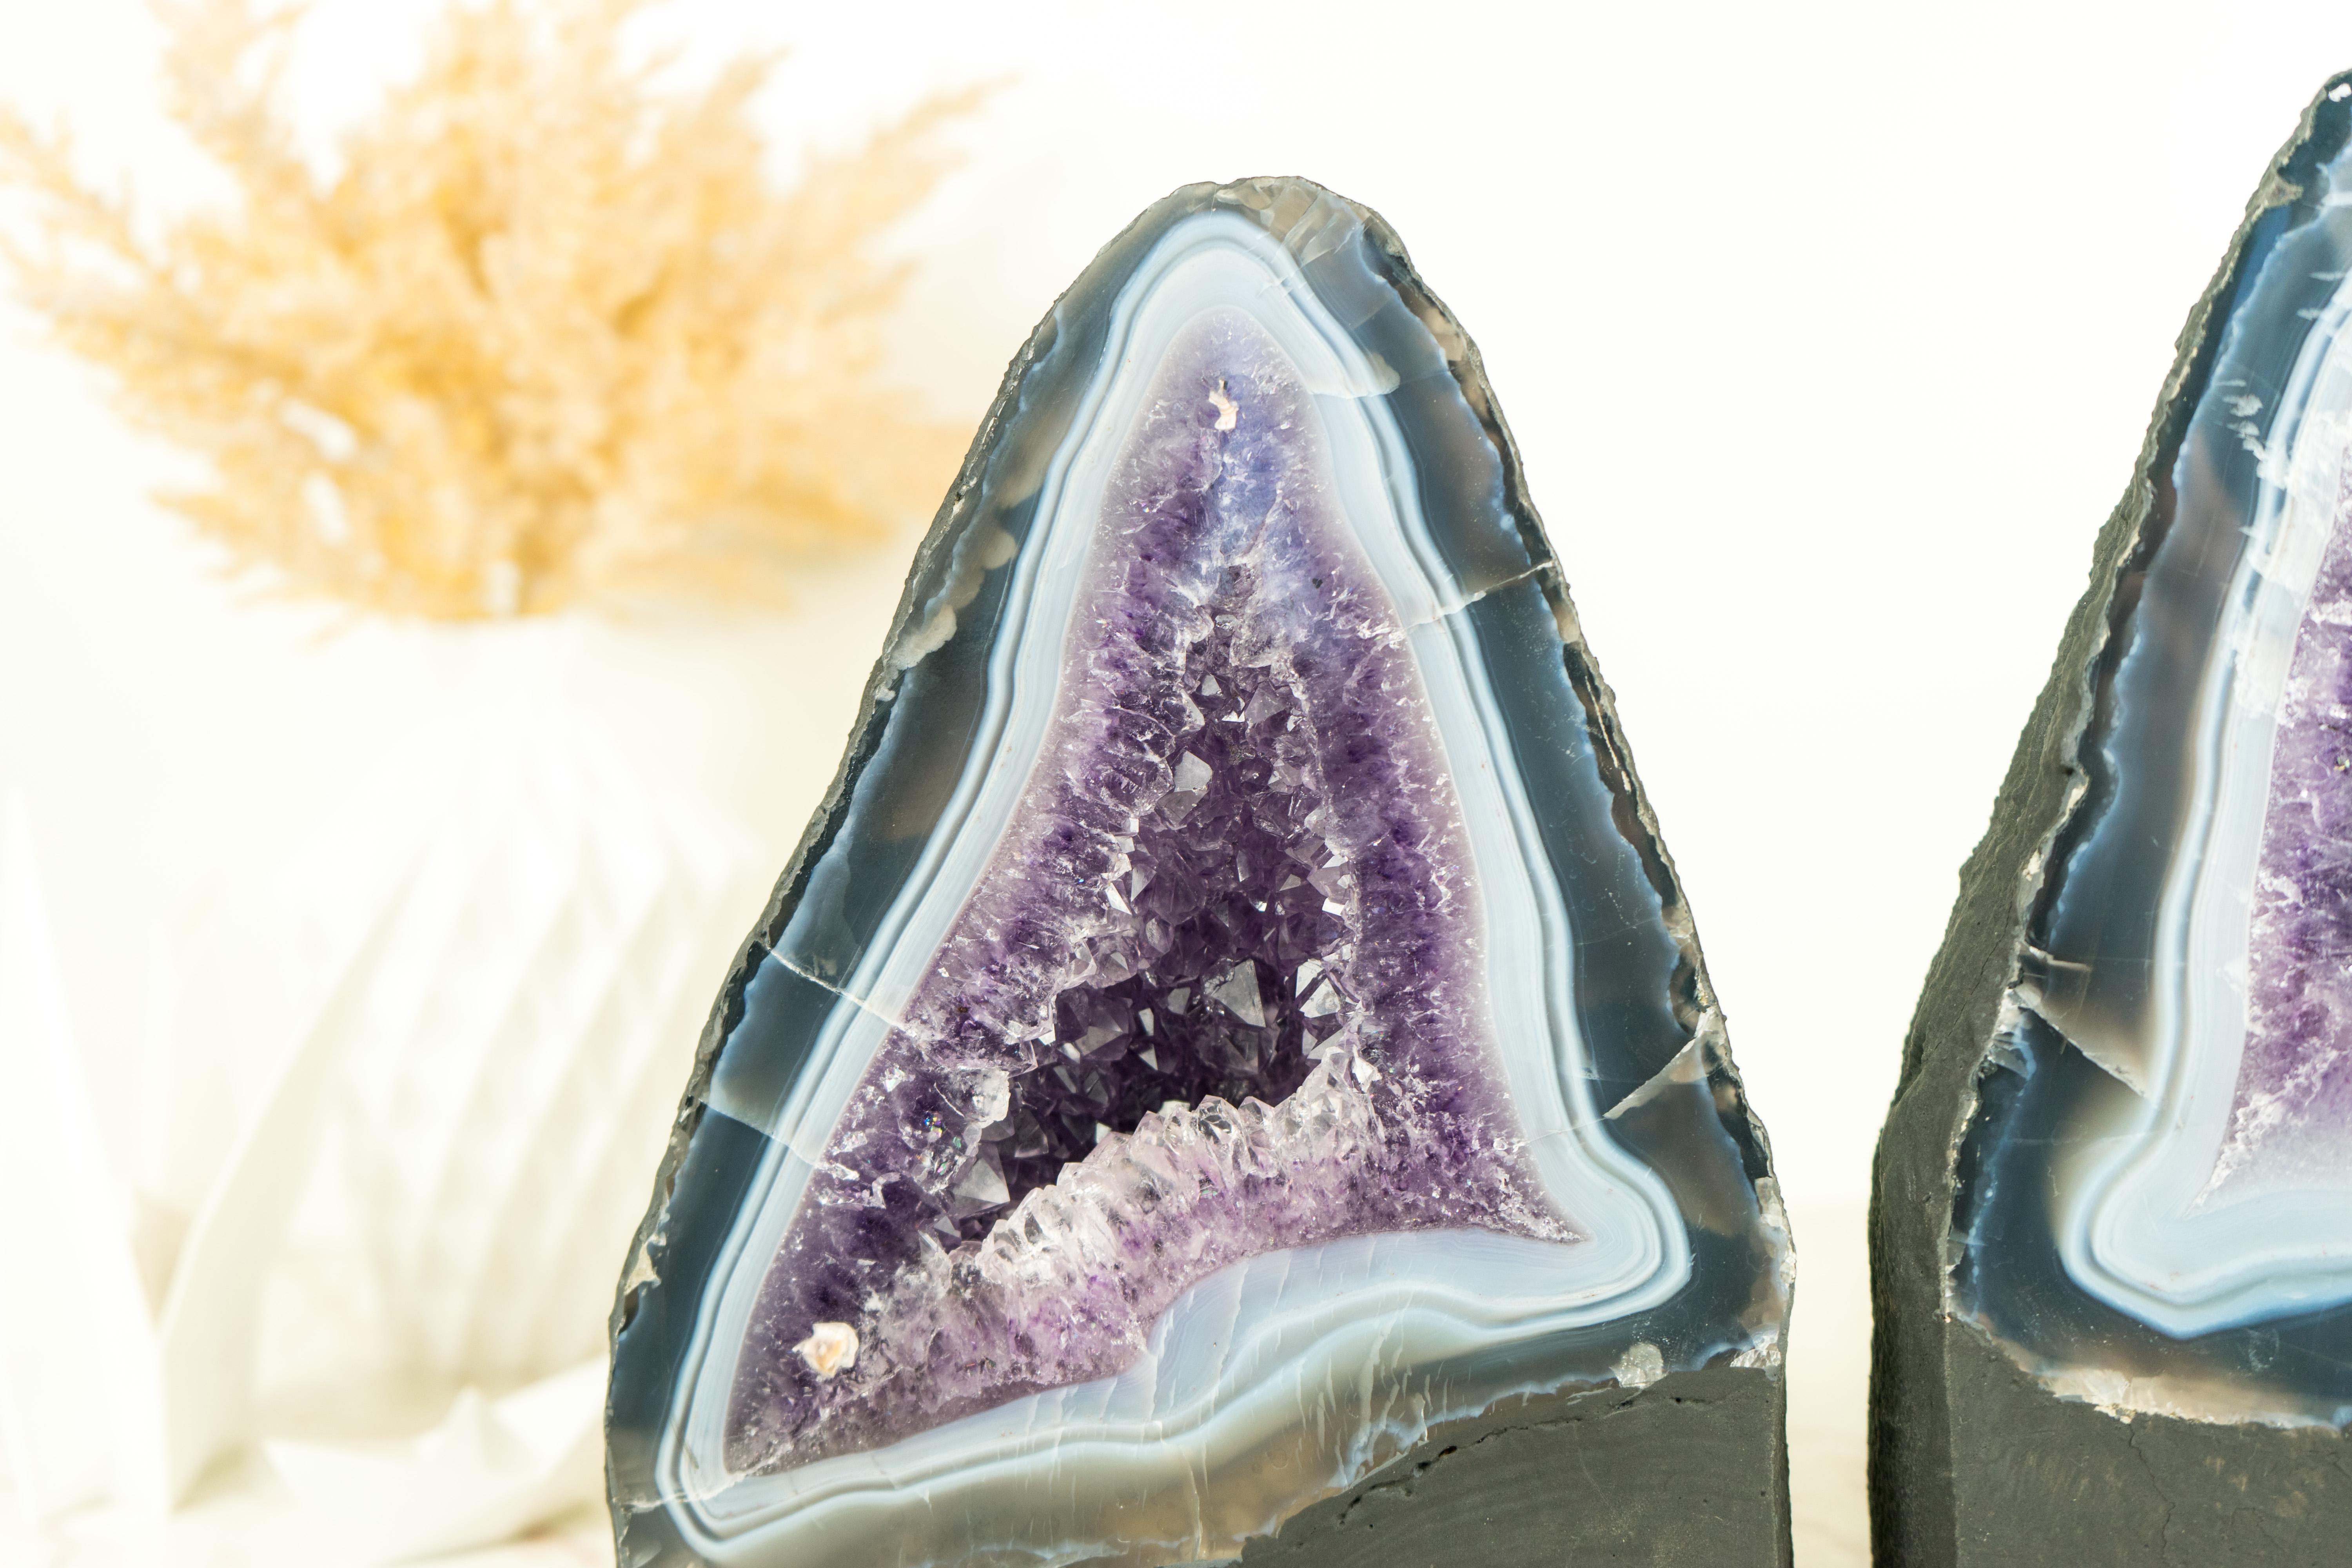 Brazilian Pair of Book-Matching Blue Lace Agate Geodes with Crystal Amethyst For Sale